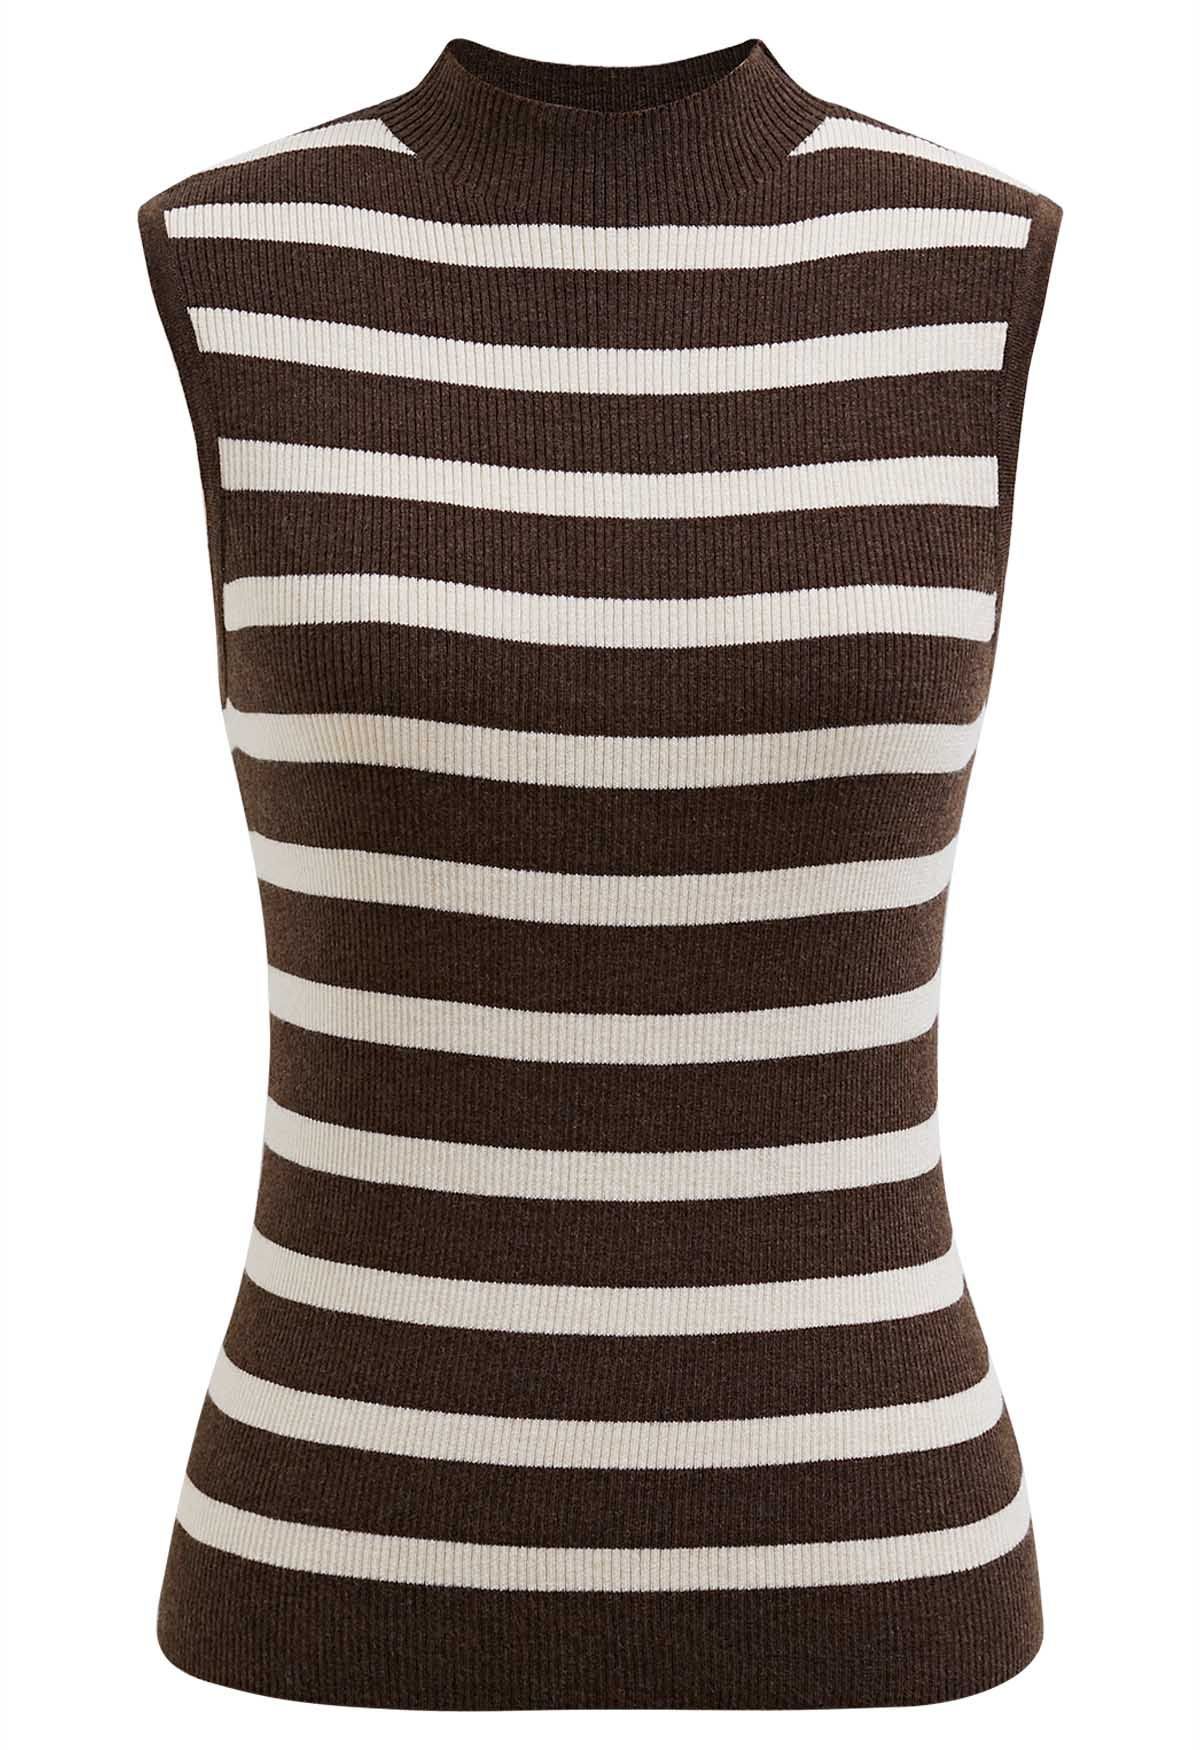 Contrast Stripe Sleeveless Knit Top in Brown | Chicwish